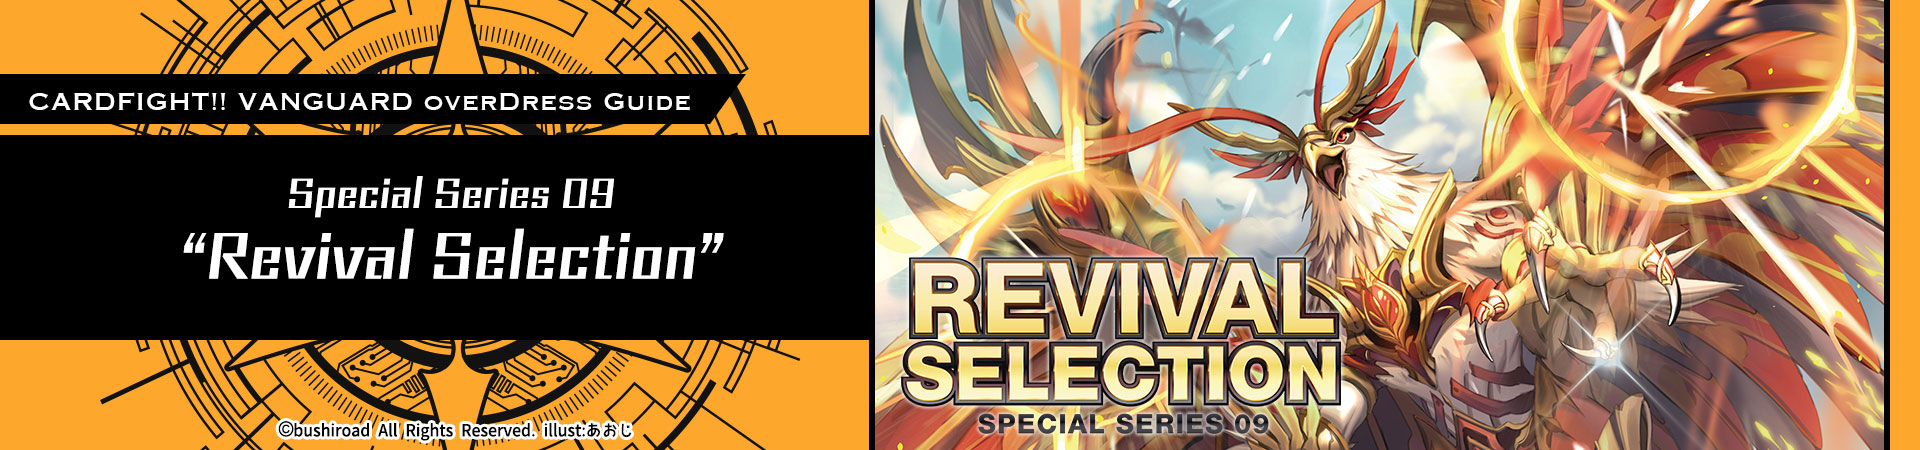 Cardfight!! Vanguard Overdress - Revival Selection